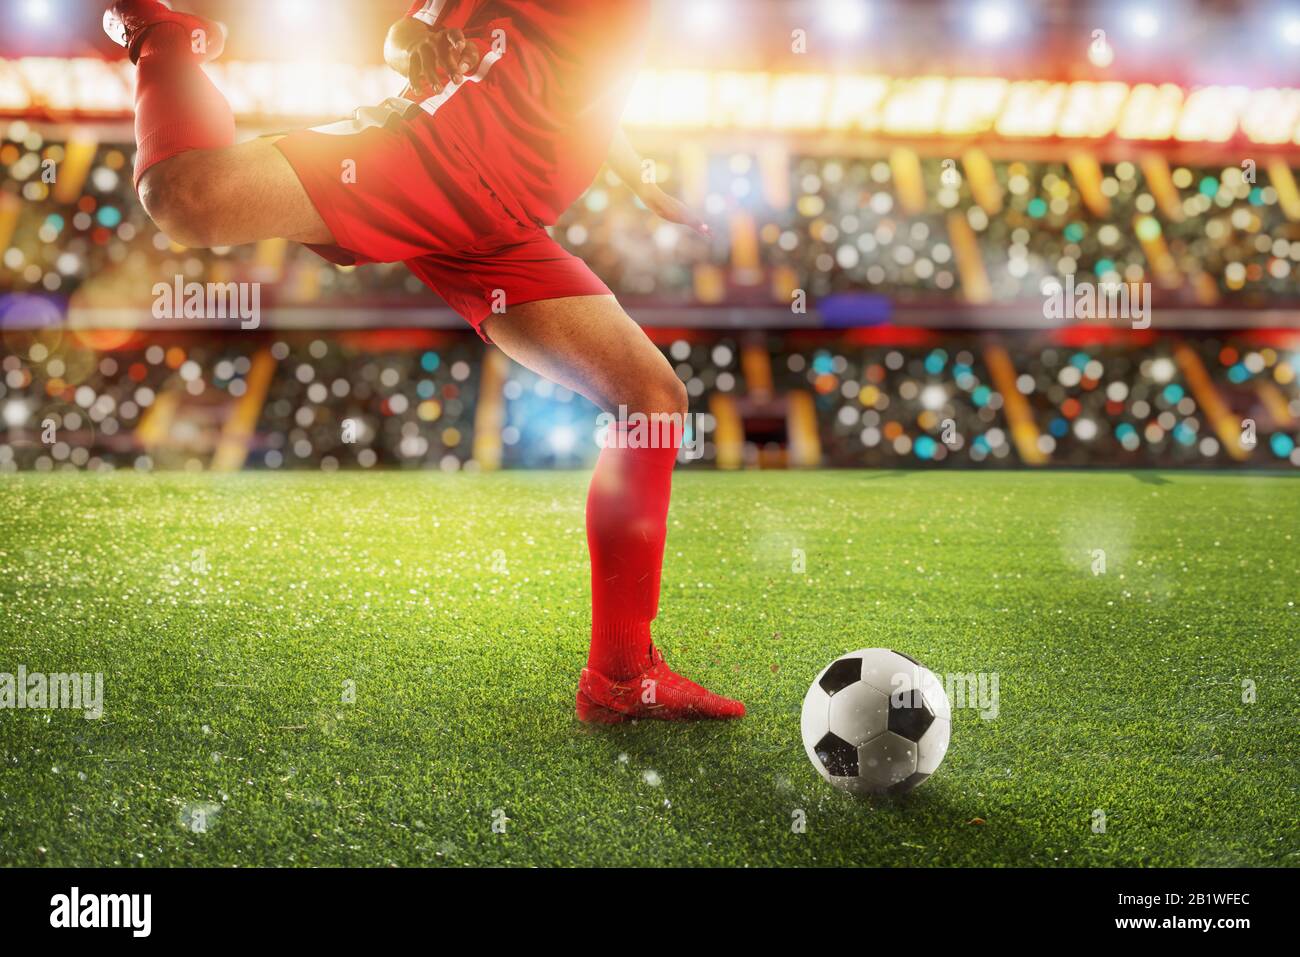 Football scene at night match with player kicking the ball with power. Stock Photo